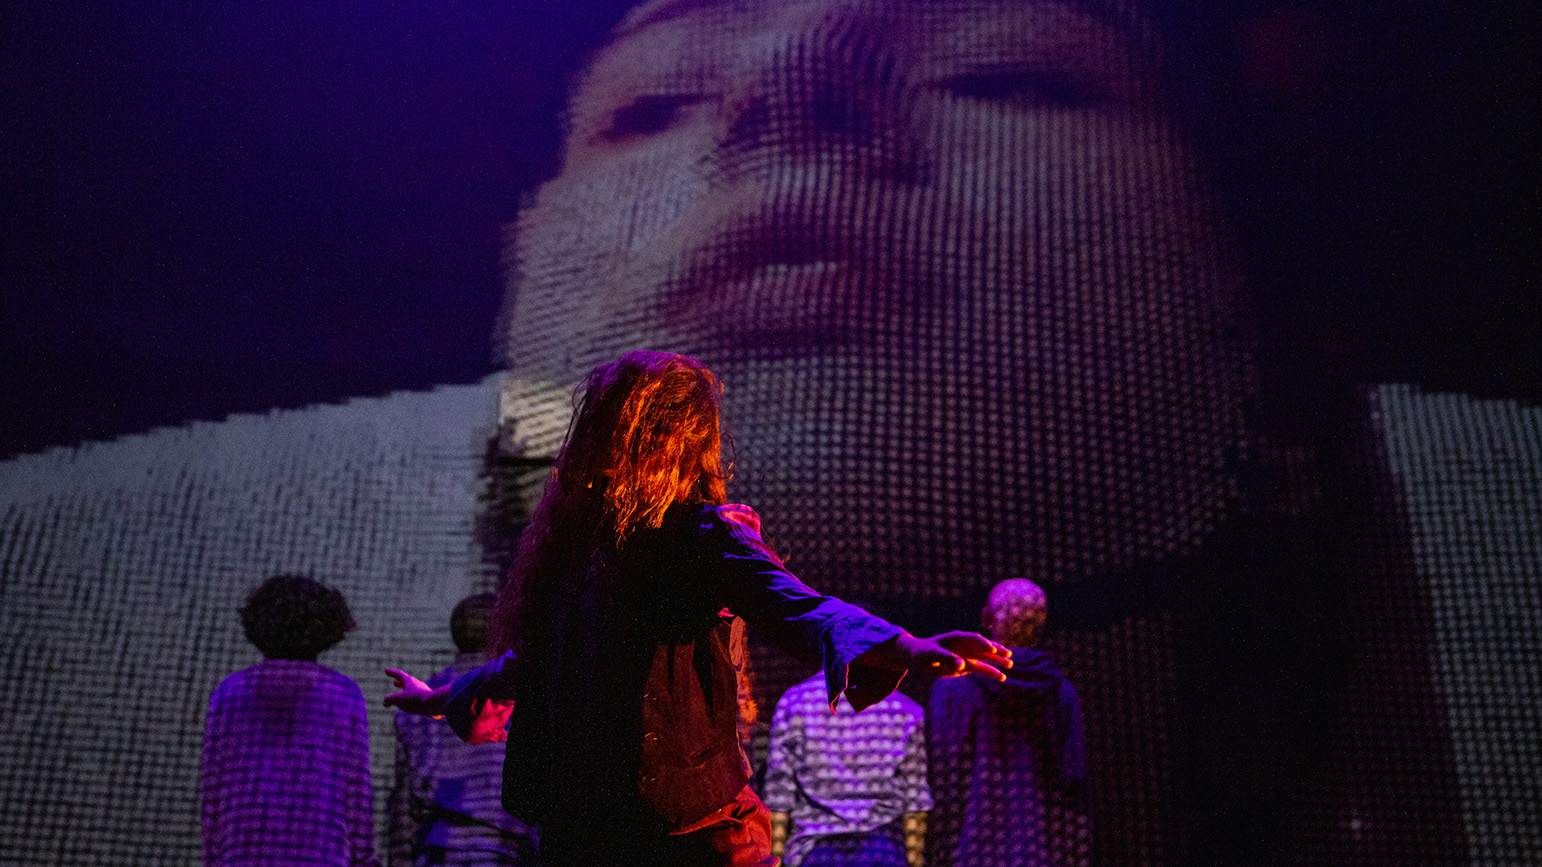 The stage saturated in purple. One dancer's hair covers her face with her arms out to the side, she stands in front of a close up pixelated projection of a white woman's face.